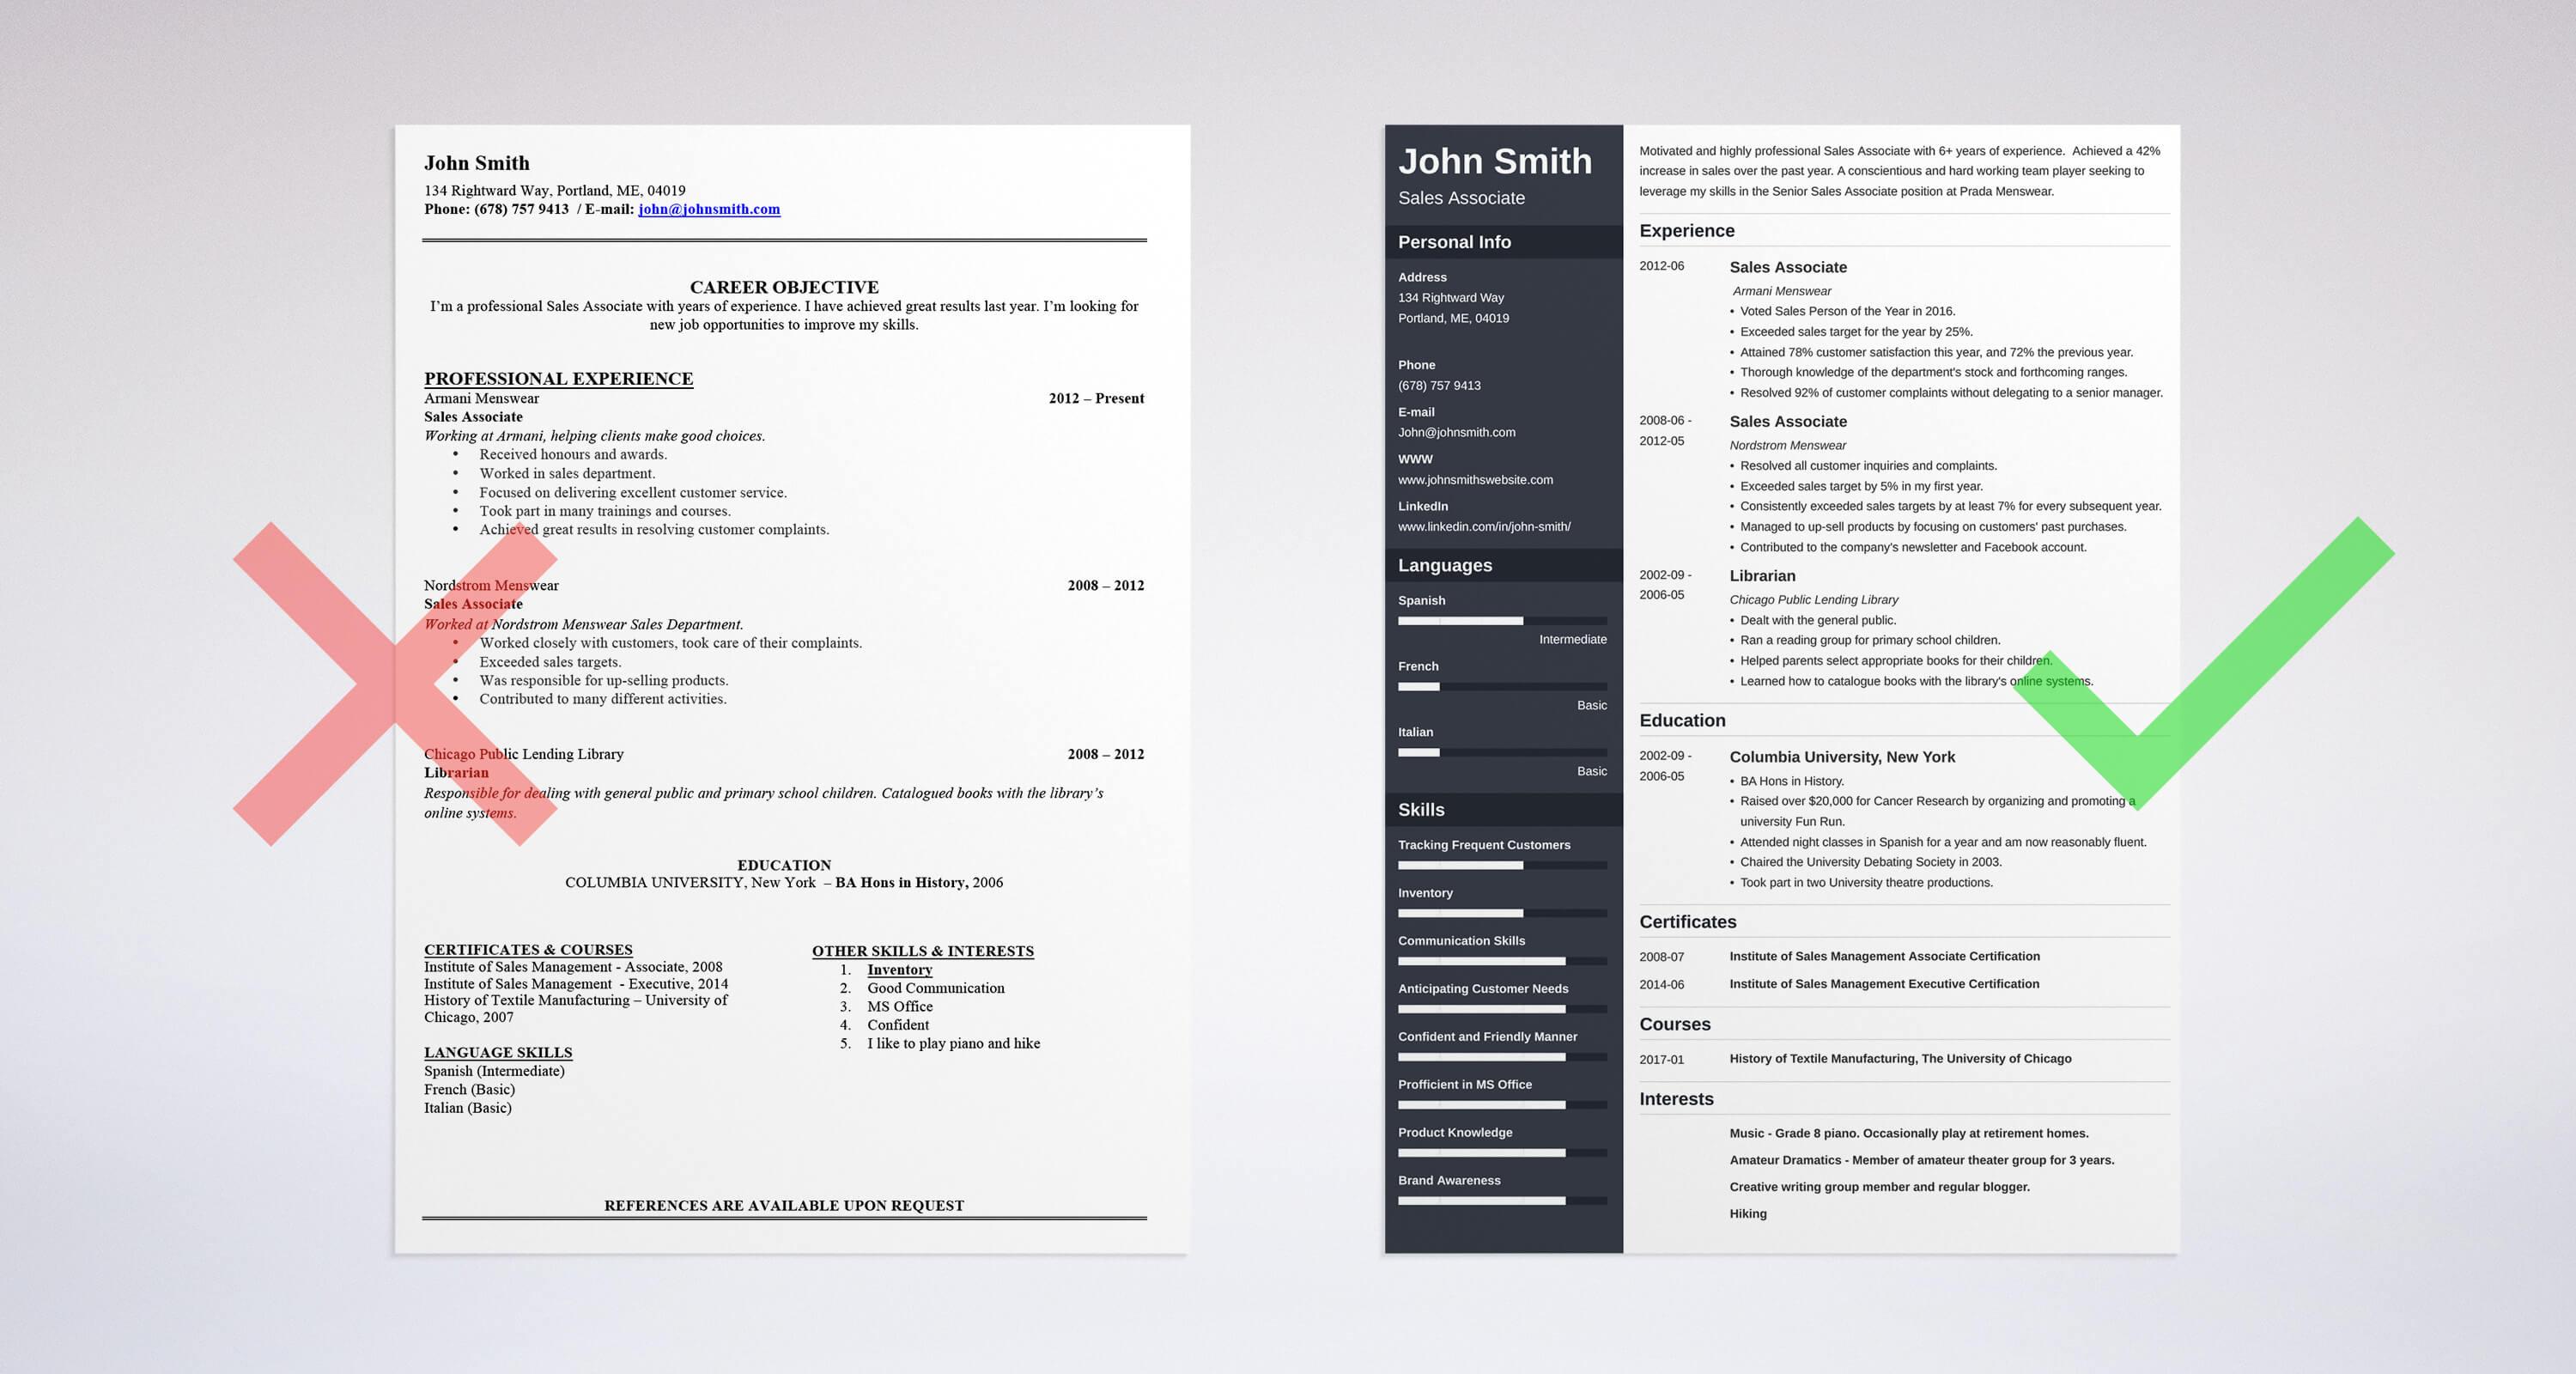 Professional Resume Summary Examples (25+ Statements)